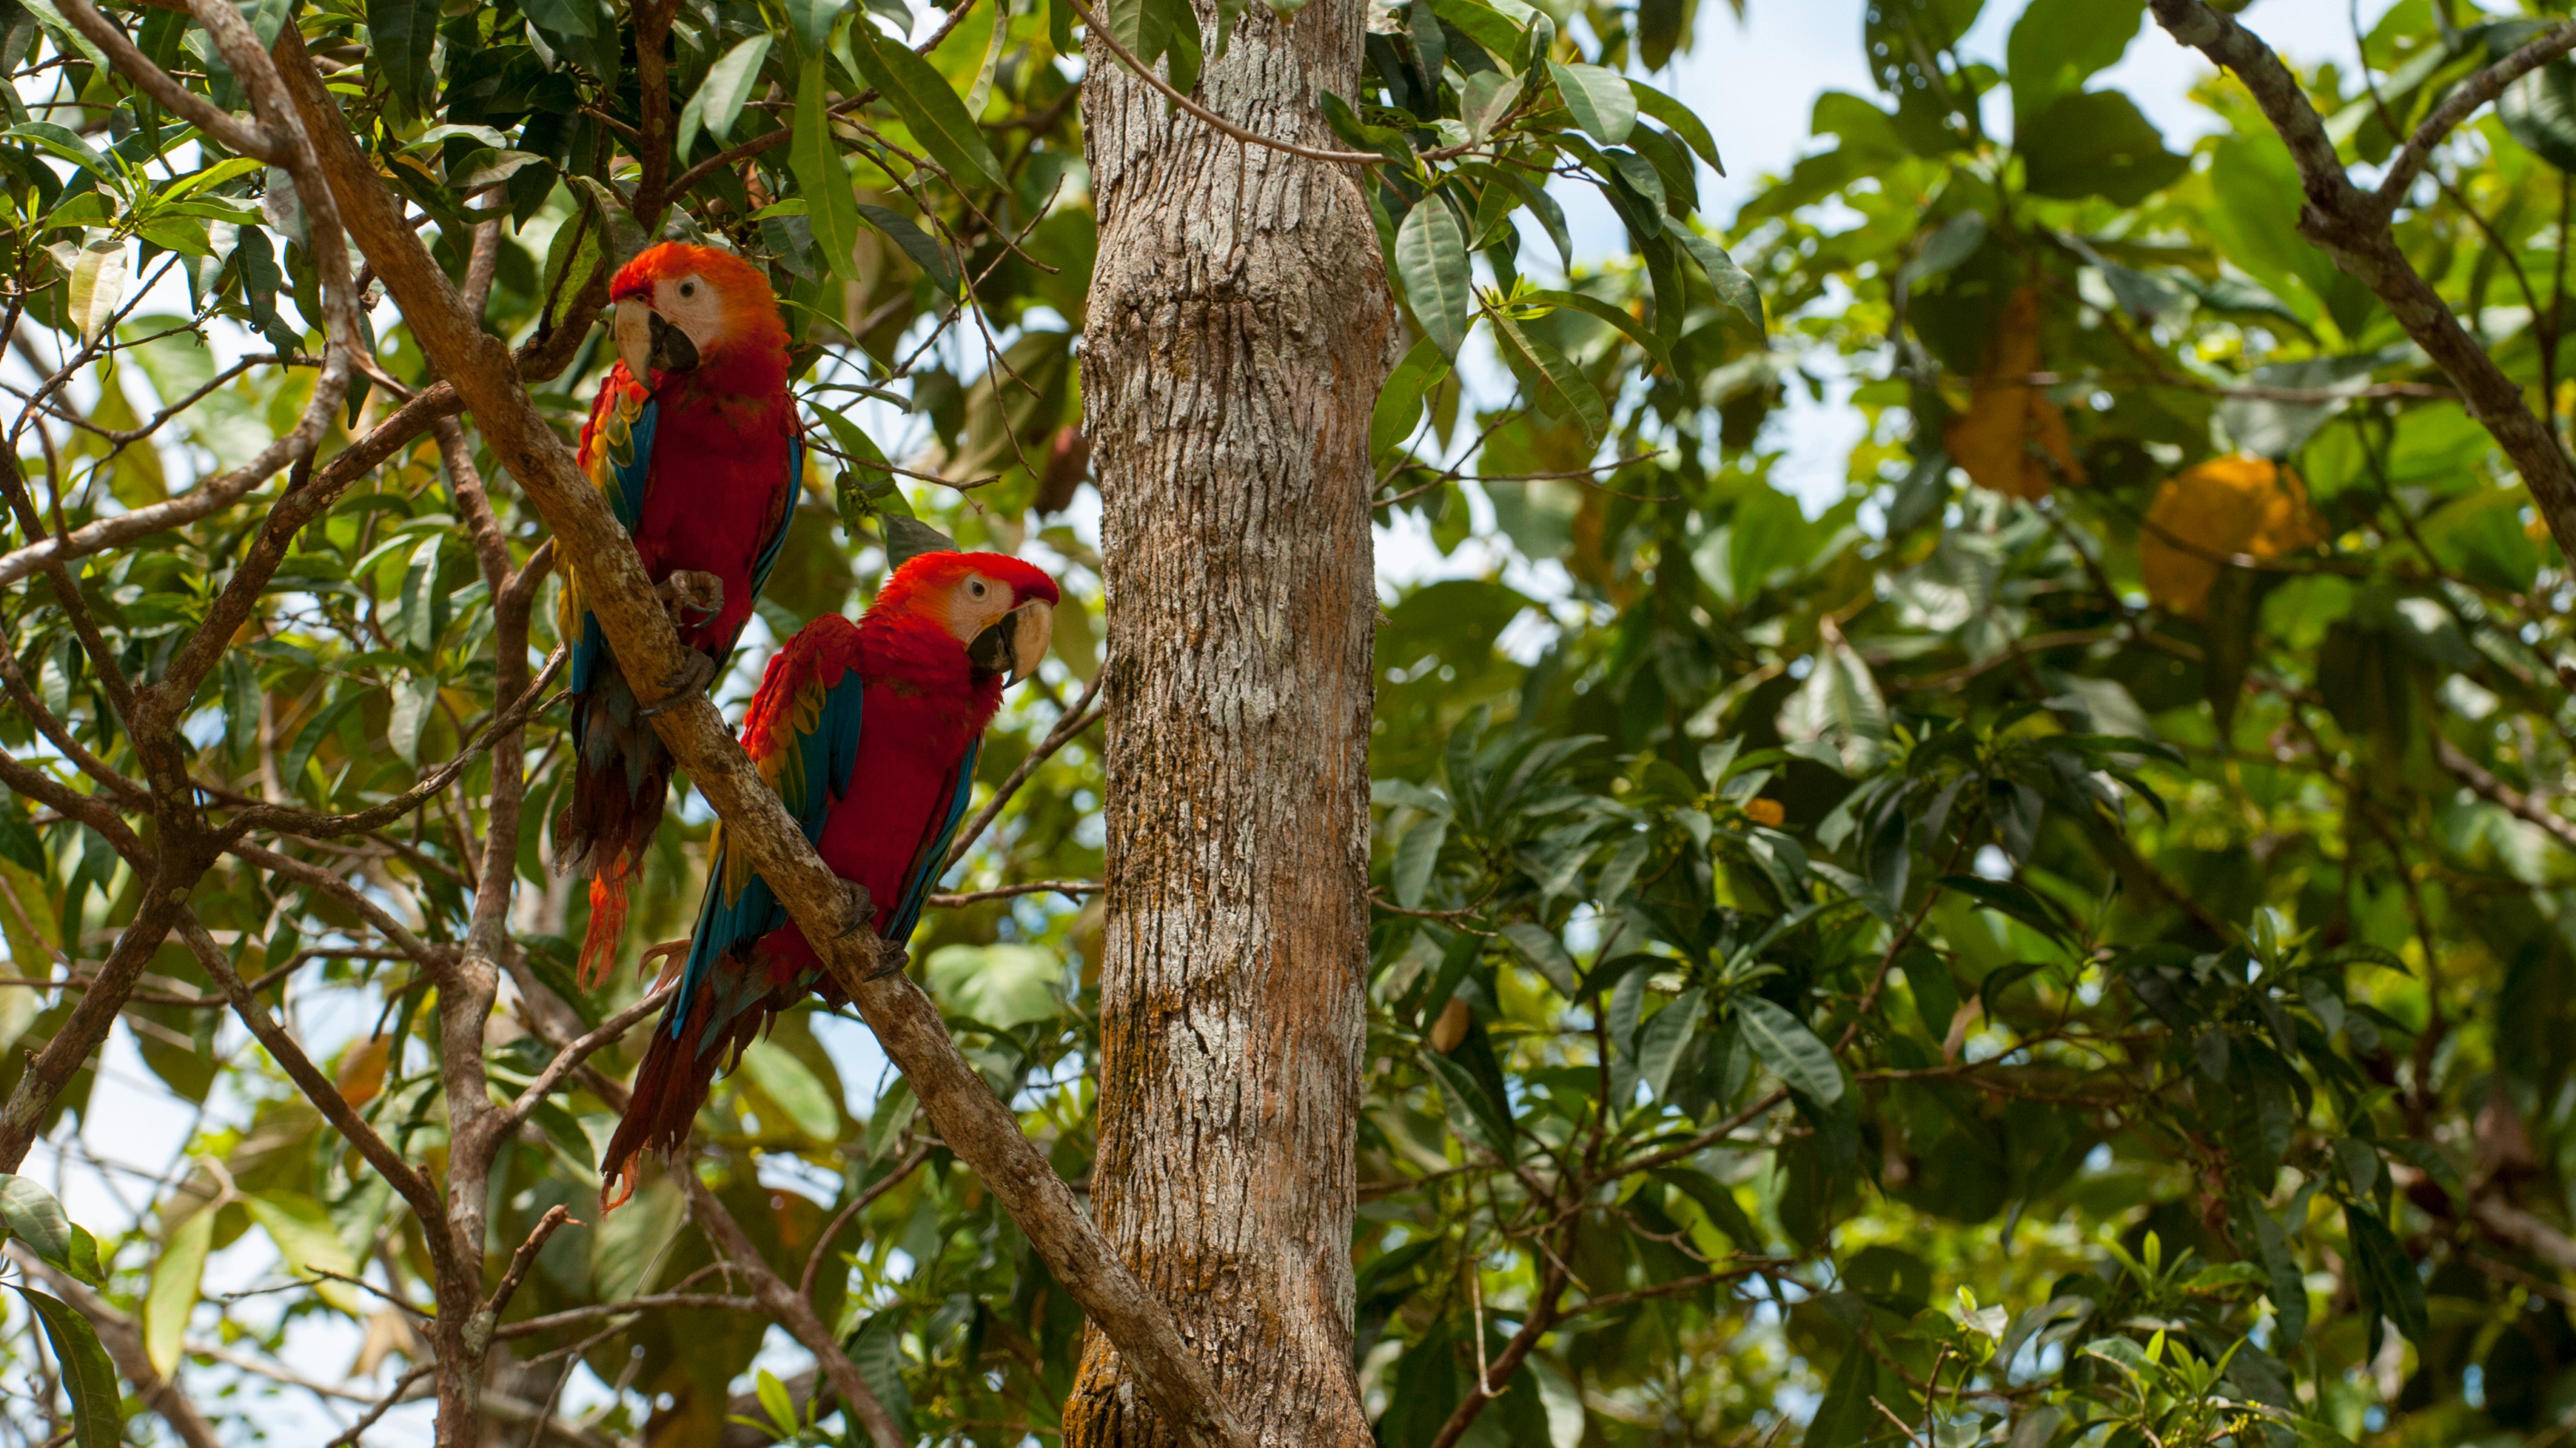 Scarlet macaws (Ara macao) perched in a tree in the